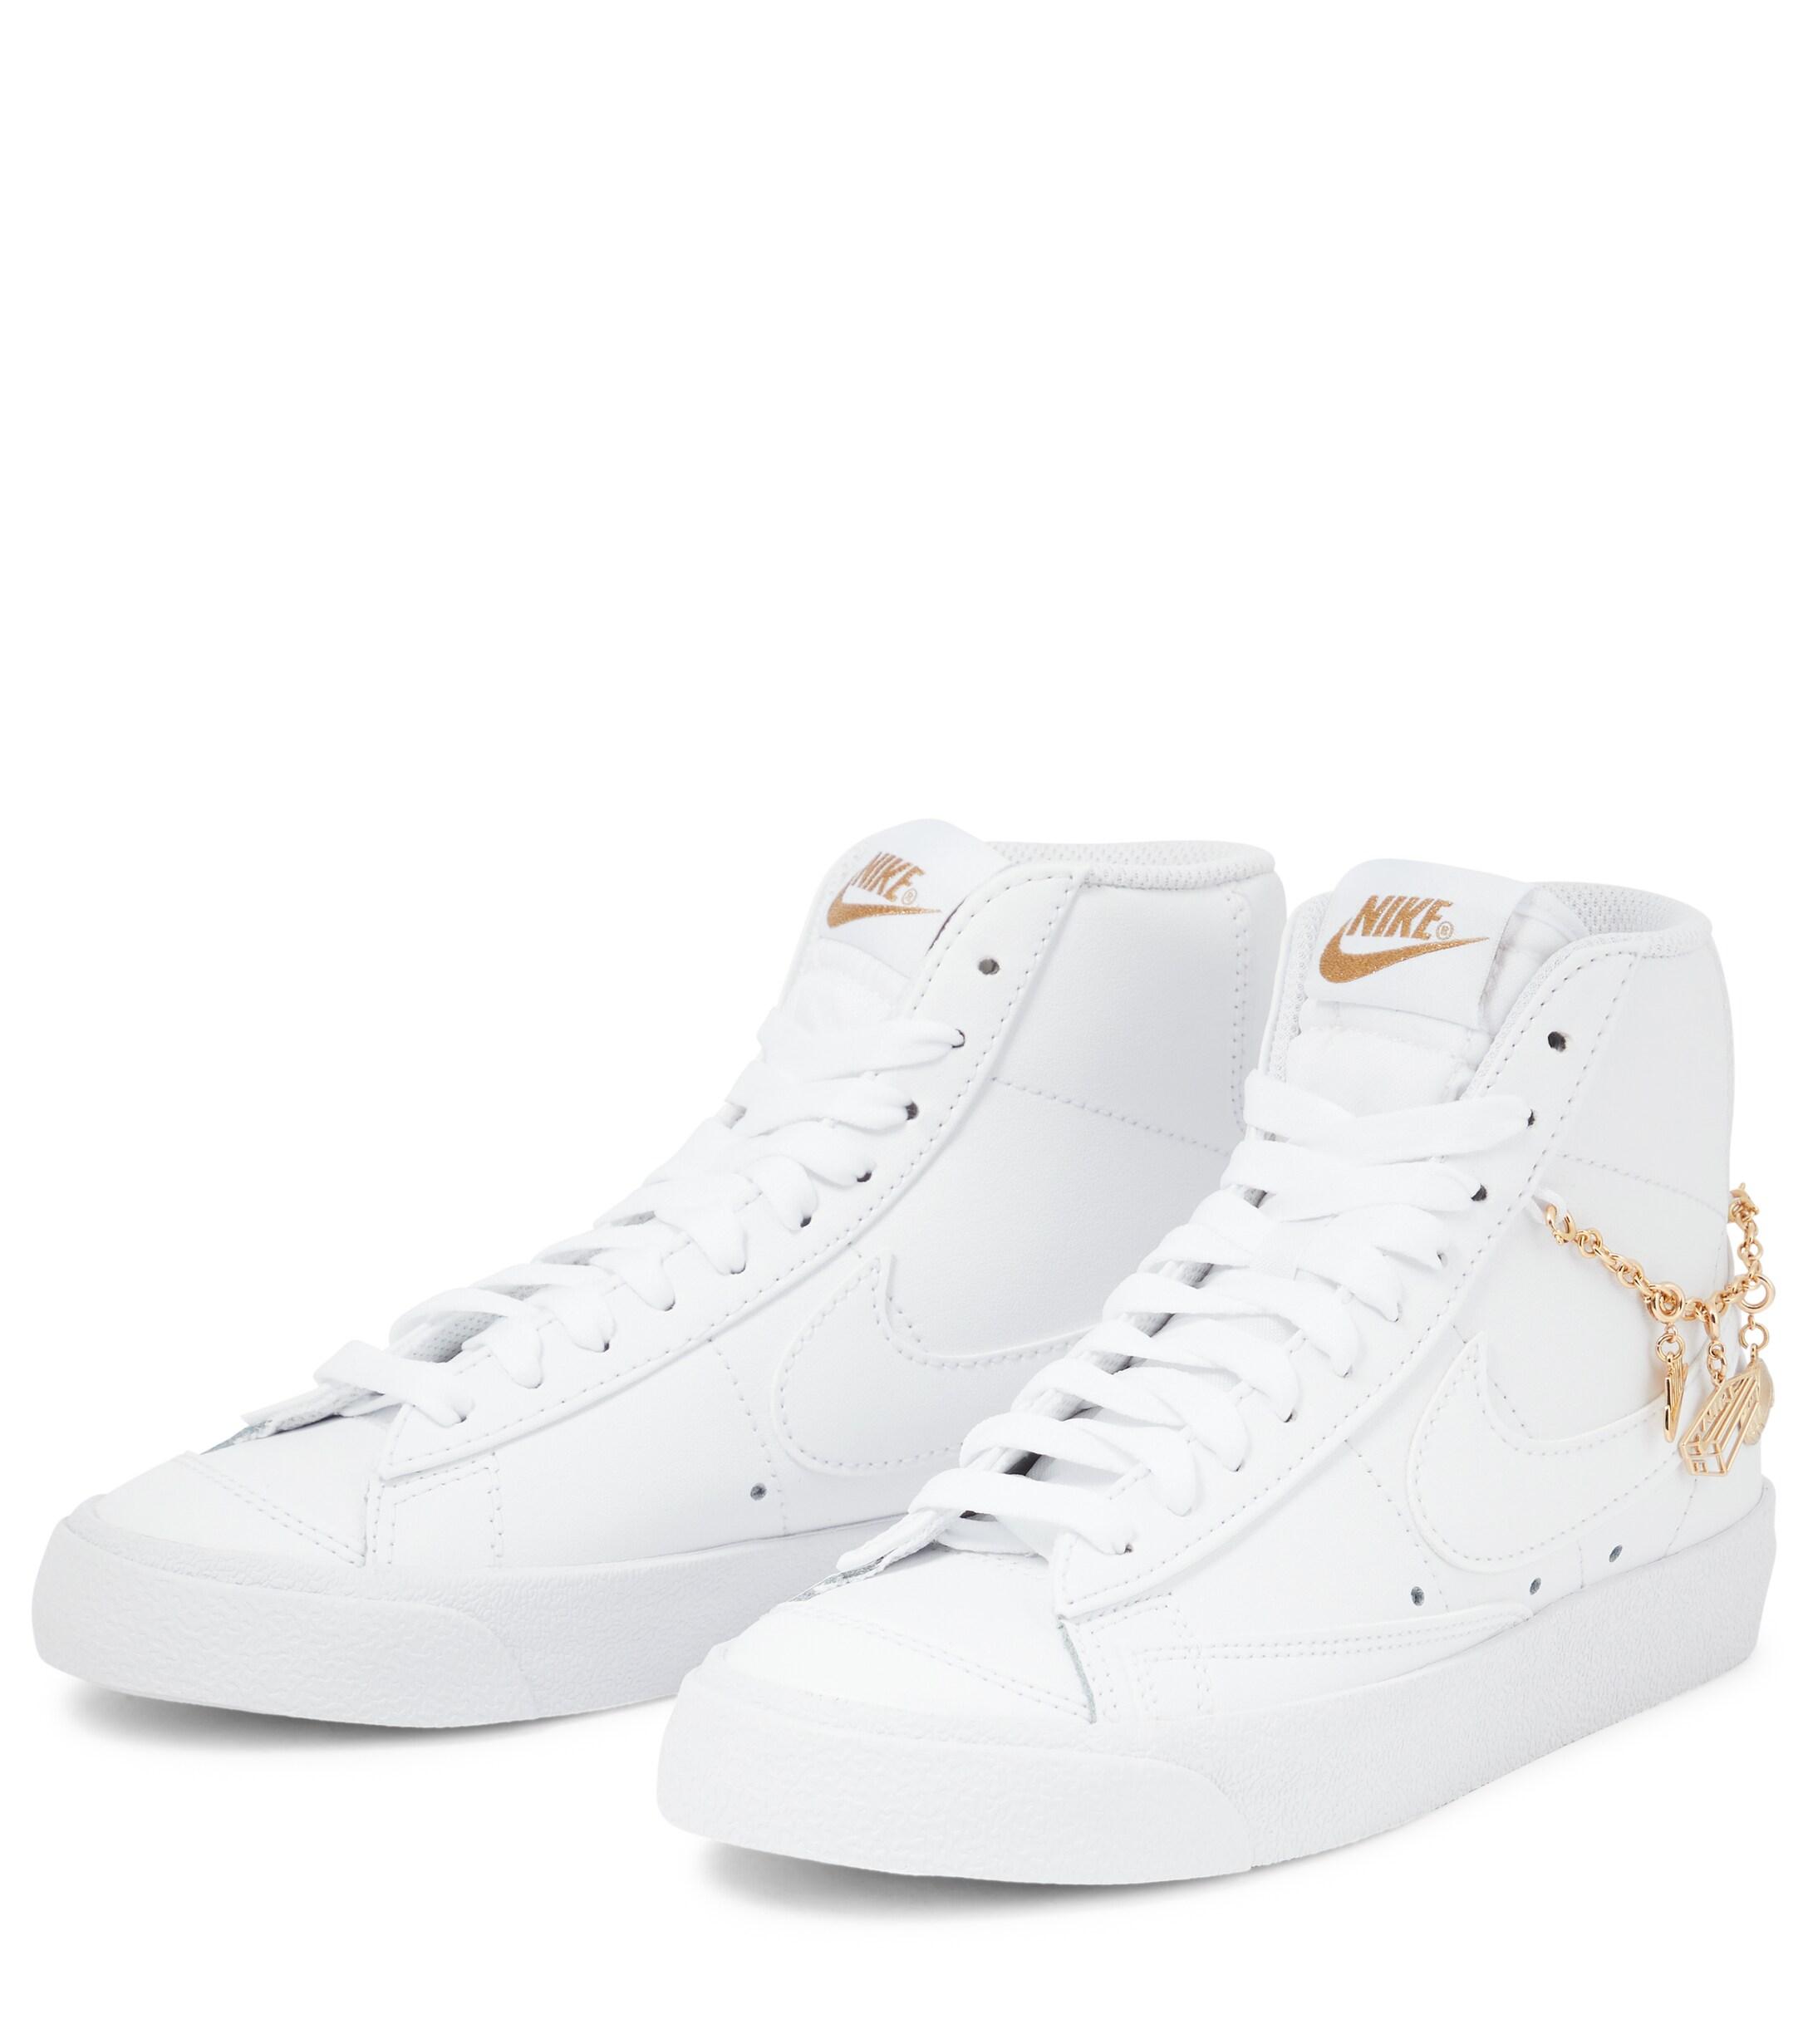 Nike Blazer Mid '77 Lx Leather Sneakers in White | Lyst